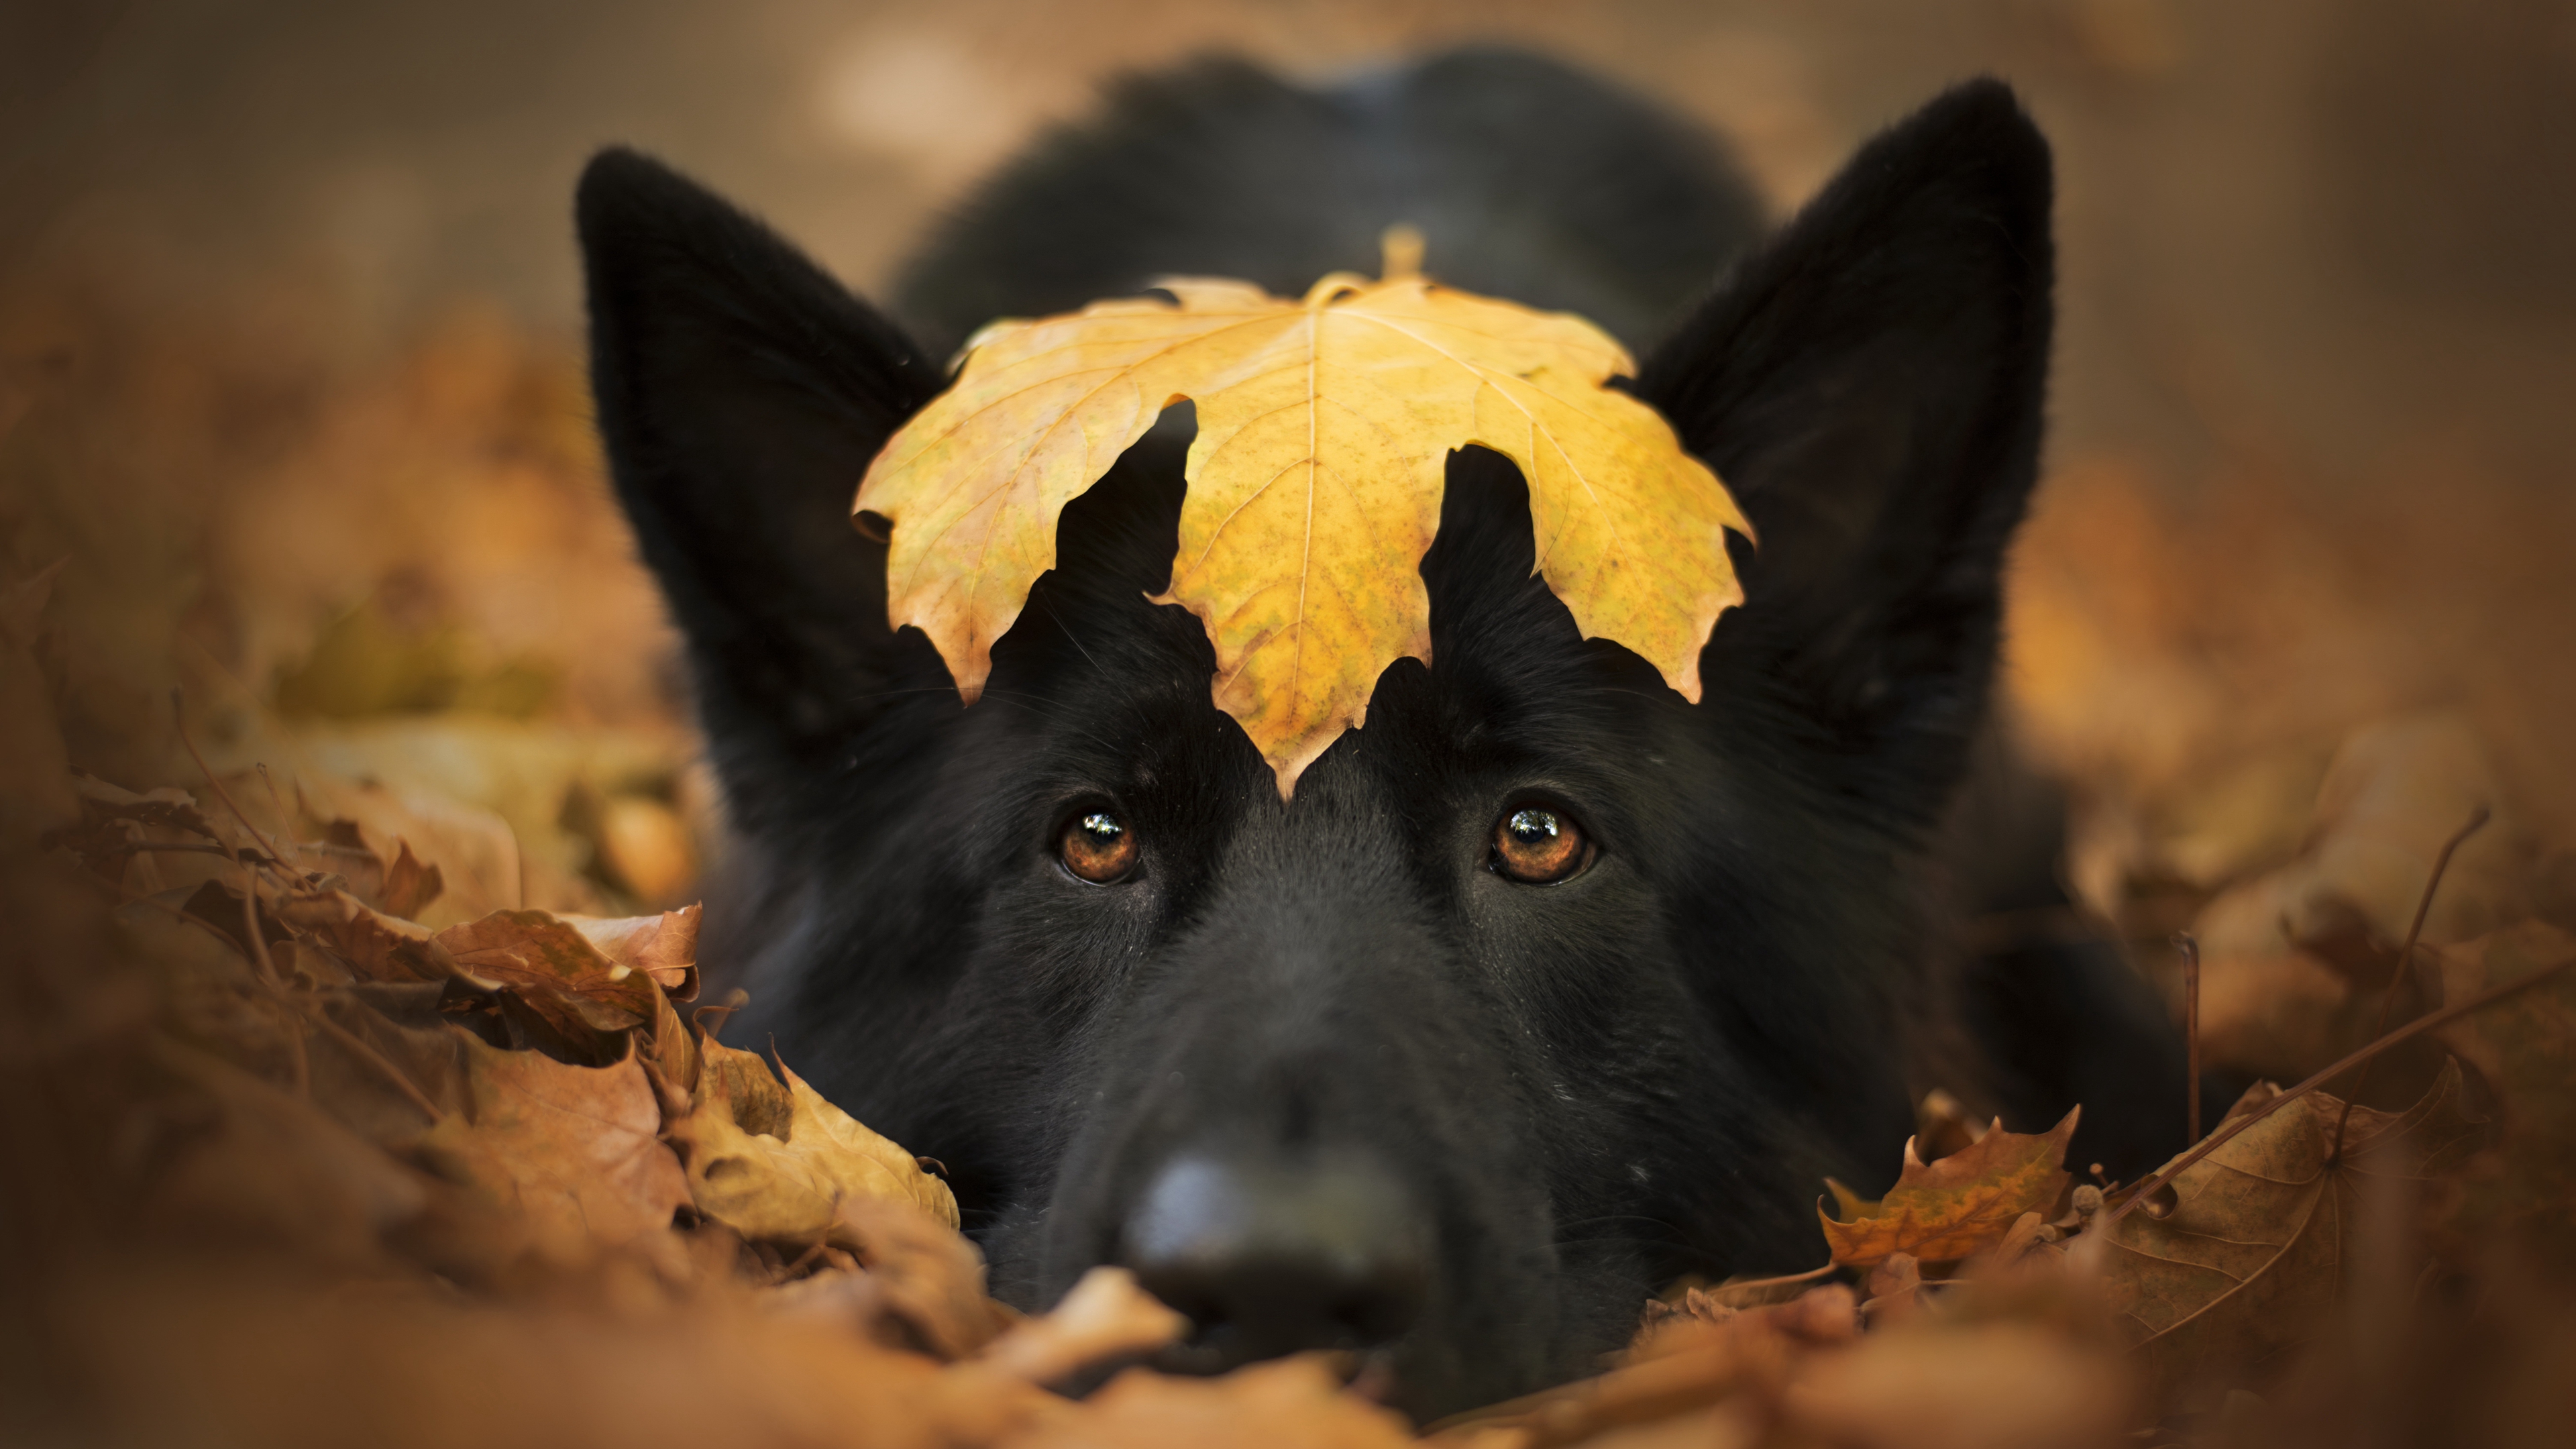 General 3840x2160 animals dog fall fallen leaves outdoors nature closeup fur depth of field leaves blurred blurry background lying down mammals looking at viewer